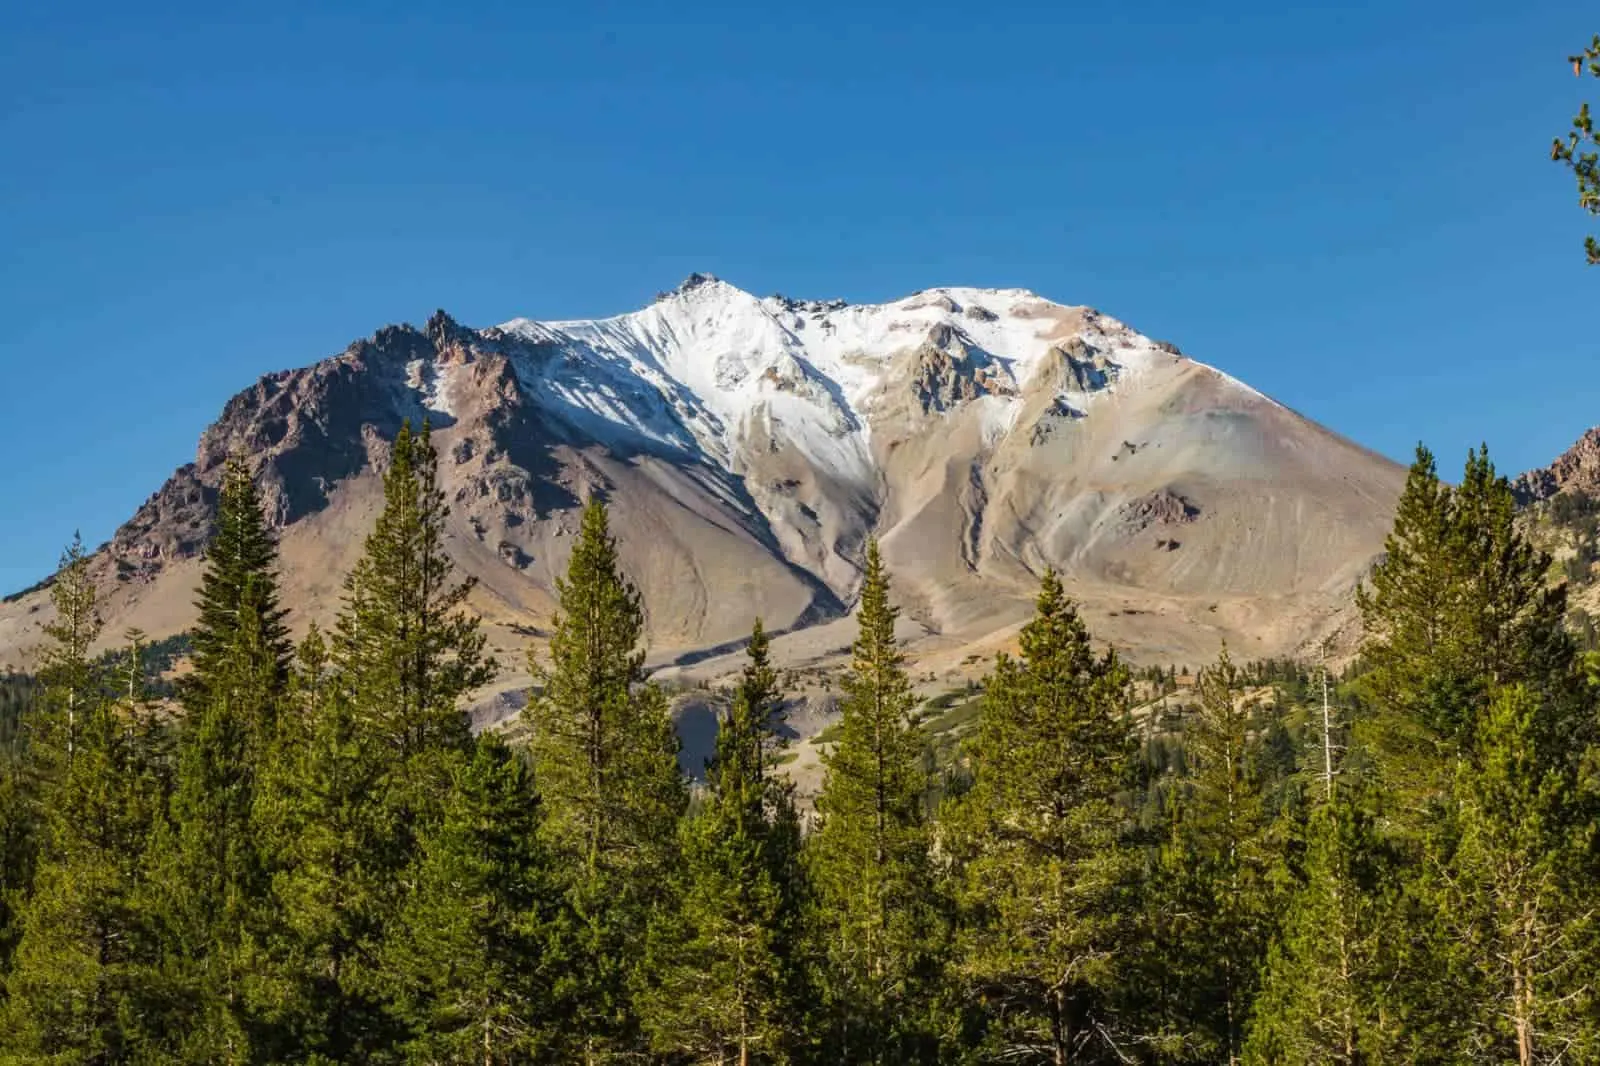 Volcanic Legacy Scenic Byway is a scenic American road trip that runs through California and Oregon.